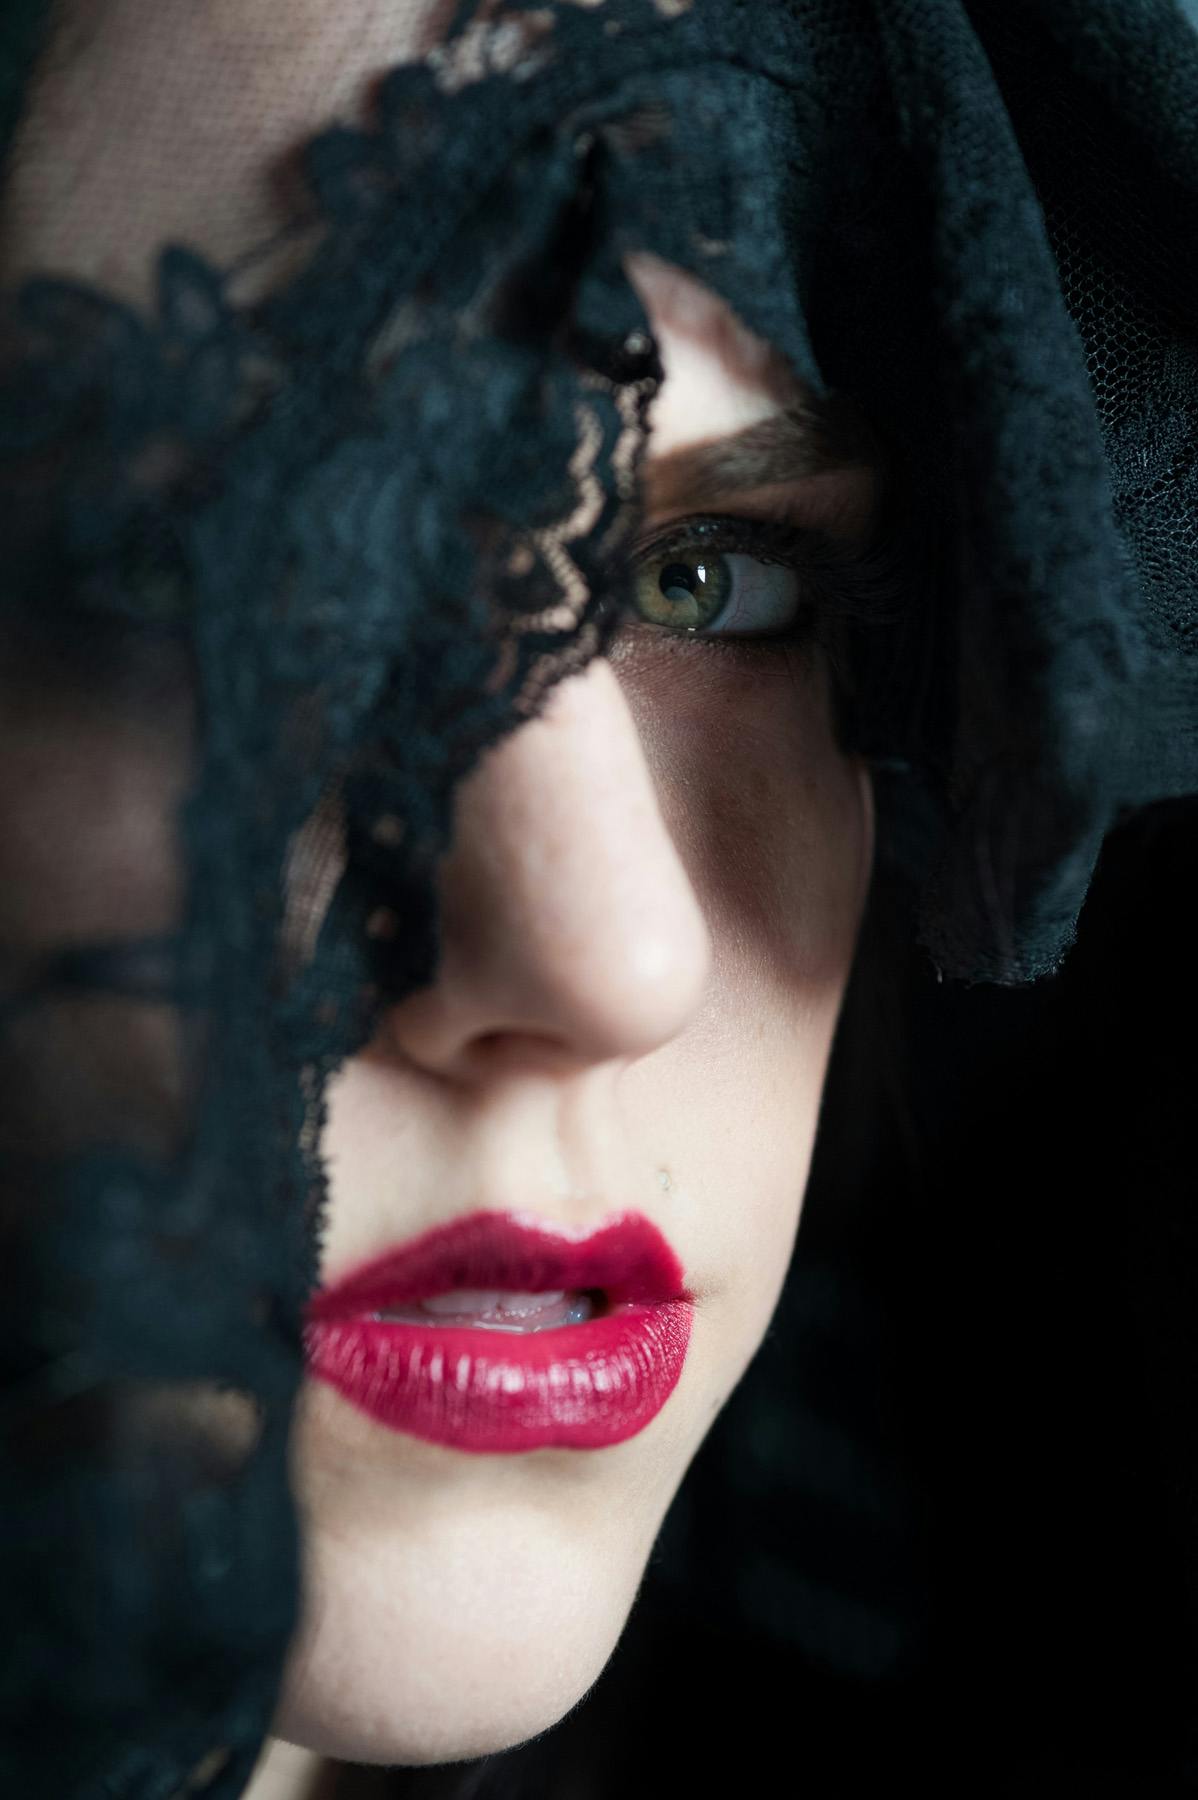 A close up color portrait of Christina wearing a black veil partially obscuring her face and you can clearly see her left eye a bright green color and her bright red lips set against her pale skin.